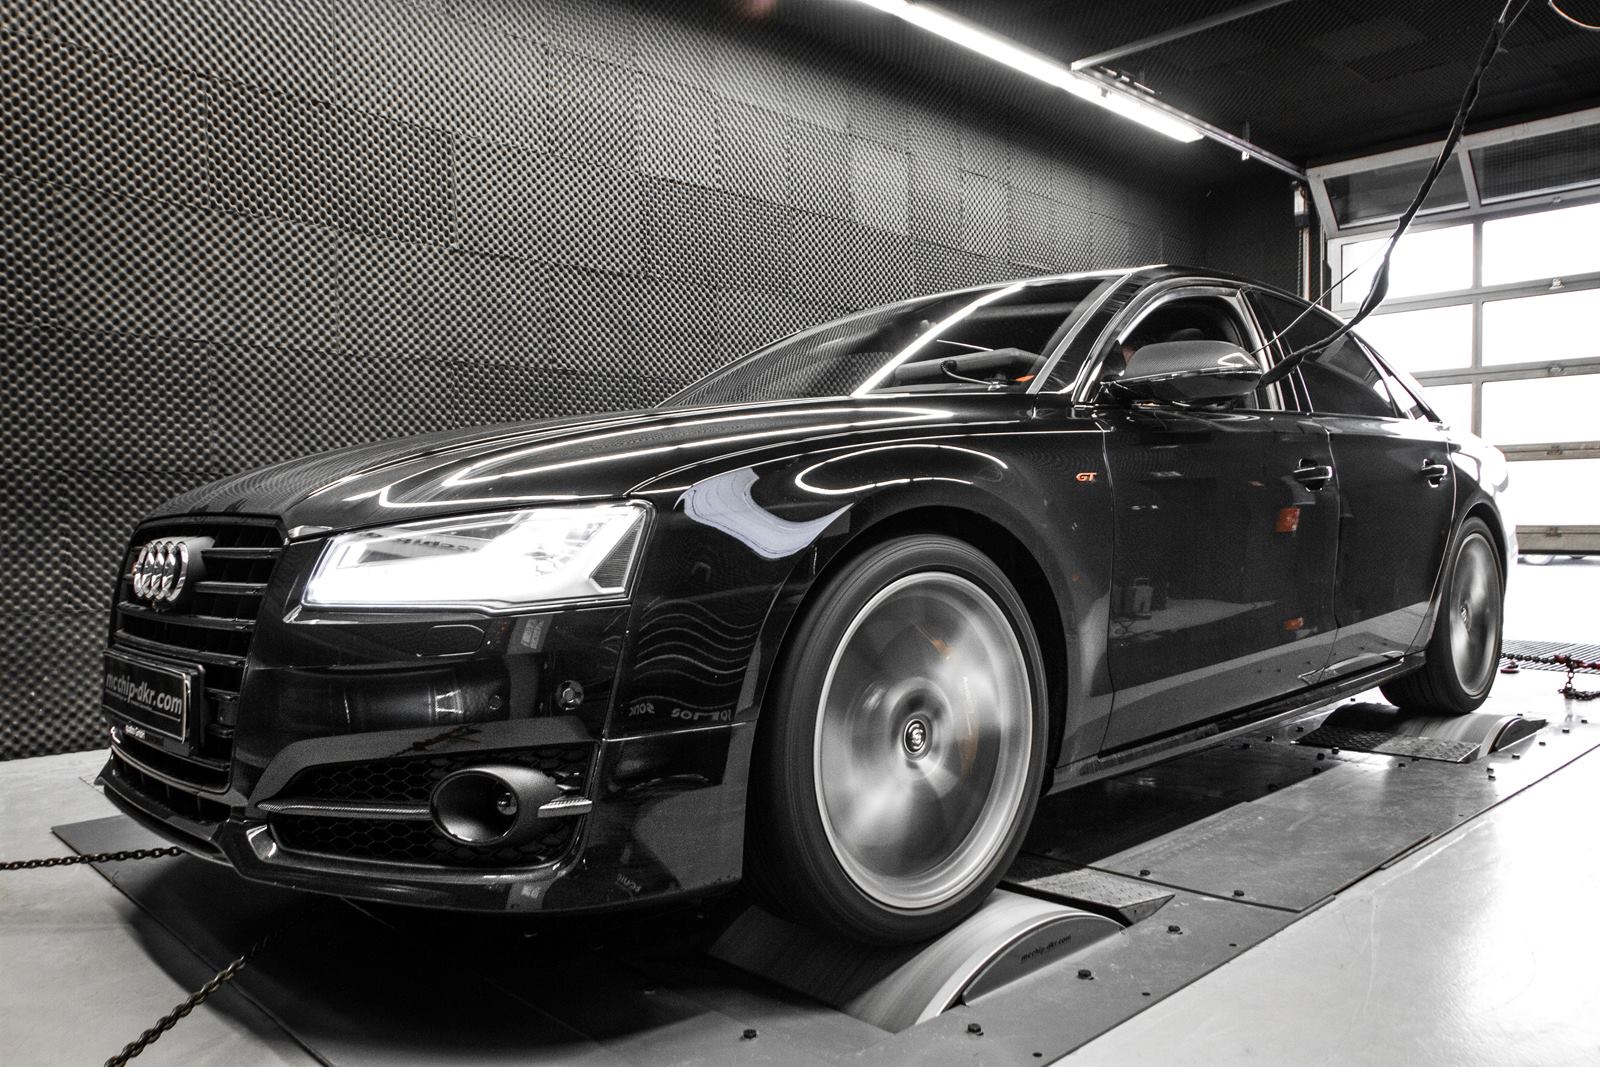 audi-s8-tuned-to-790-hp-by-mcchip-dkr-and-the-photos-are-cool_3-autonovosti.me-2